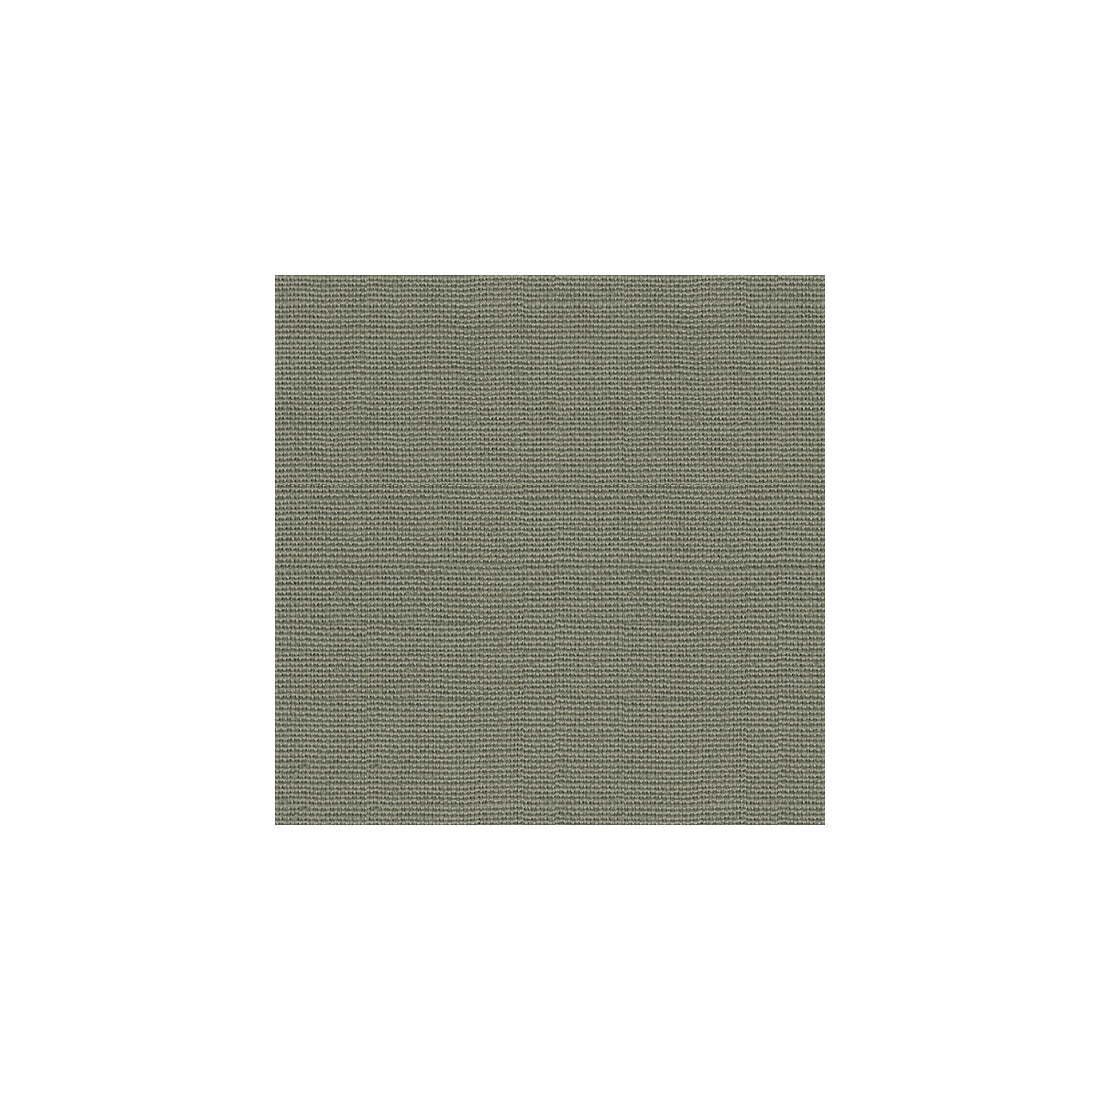 Stone Harbor fabric in flint color - pattern 27591.2121.0 - by Kravet Basics in the Perfect Plains collection